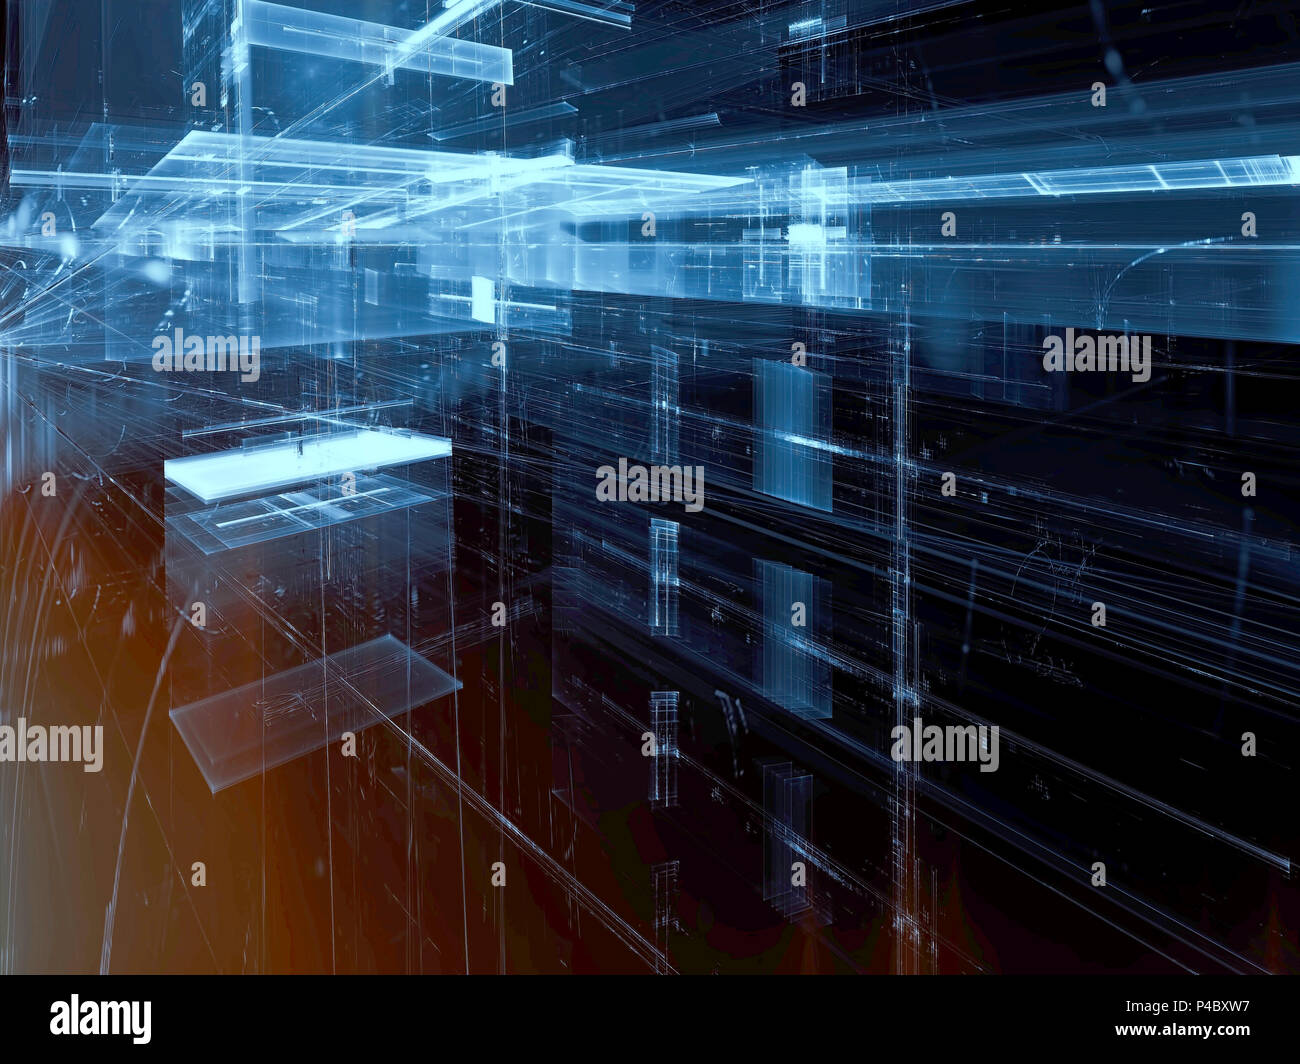 Technology background - 3d illustration. Abstract computer-generated image.  Digital art: glass walls with perspective and light effect. Vr or sci-fi c  Stock Photo - Alamy